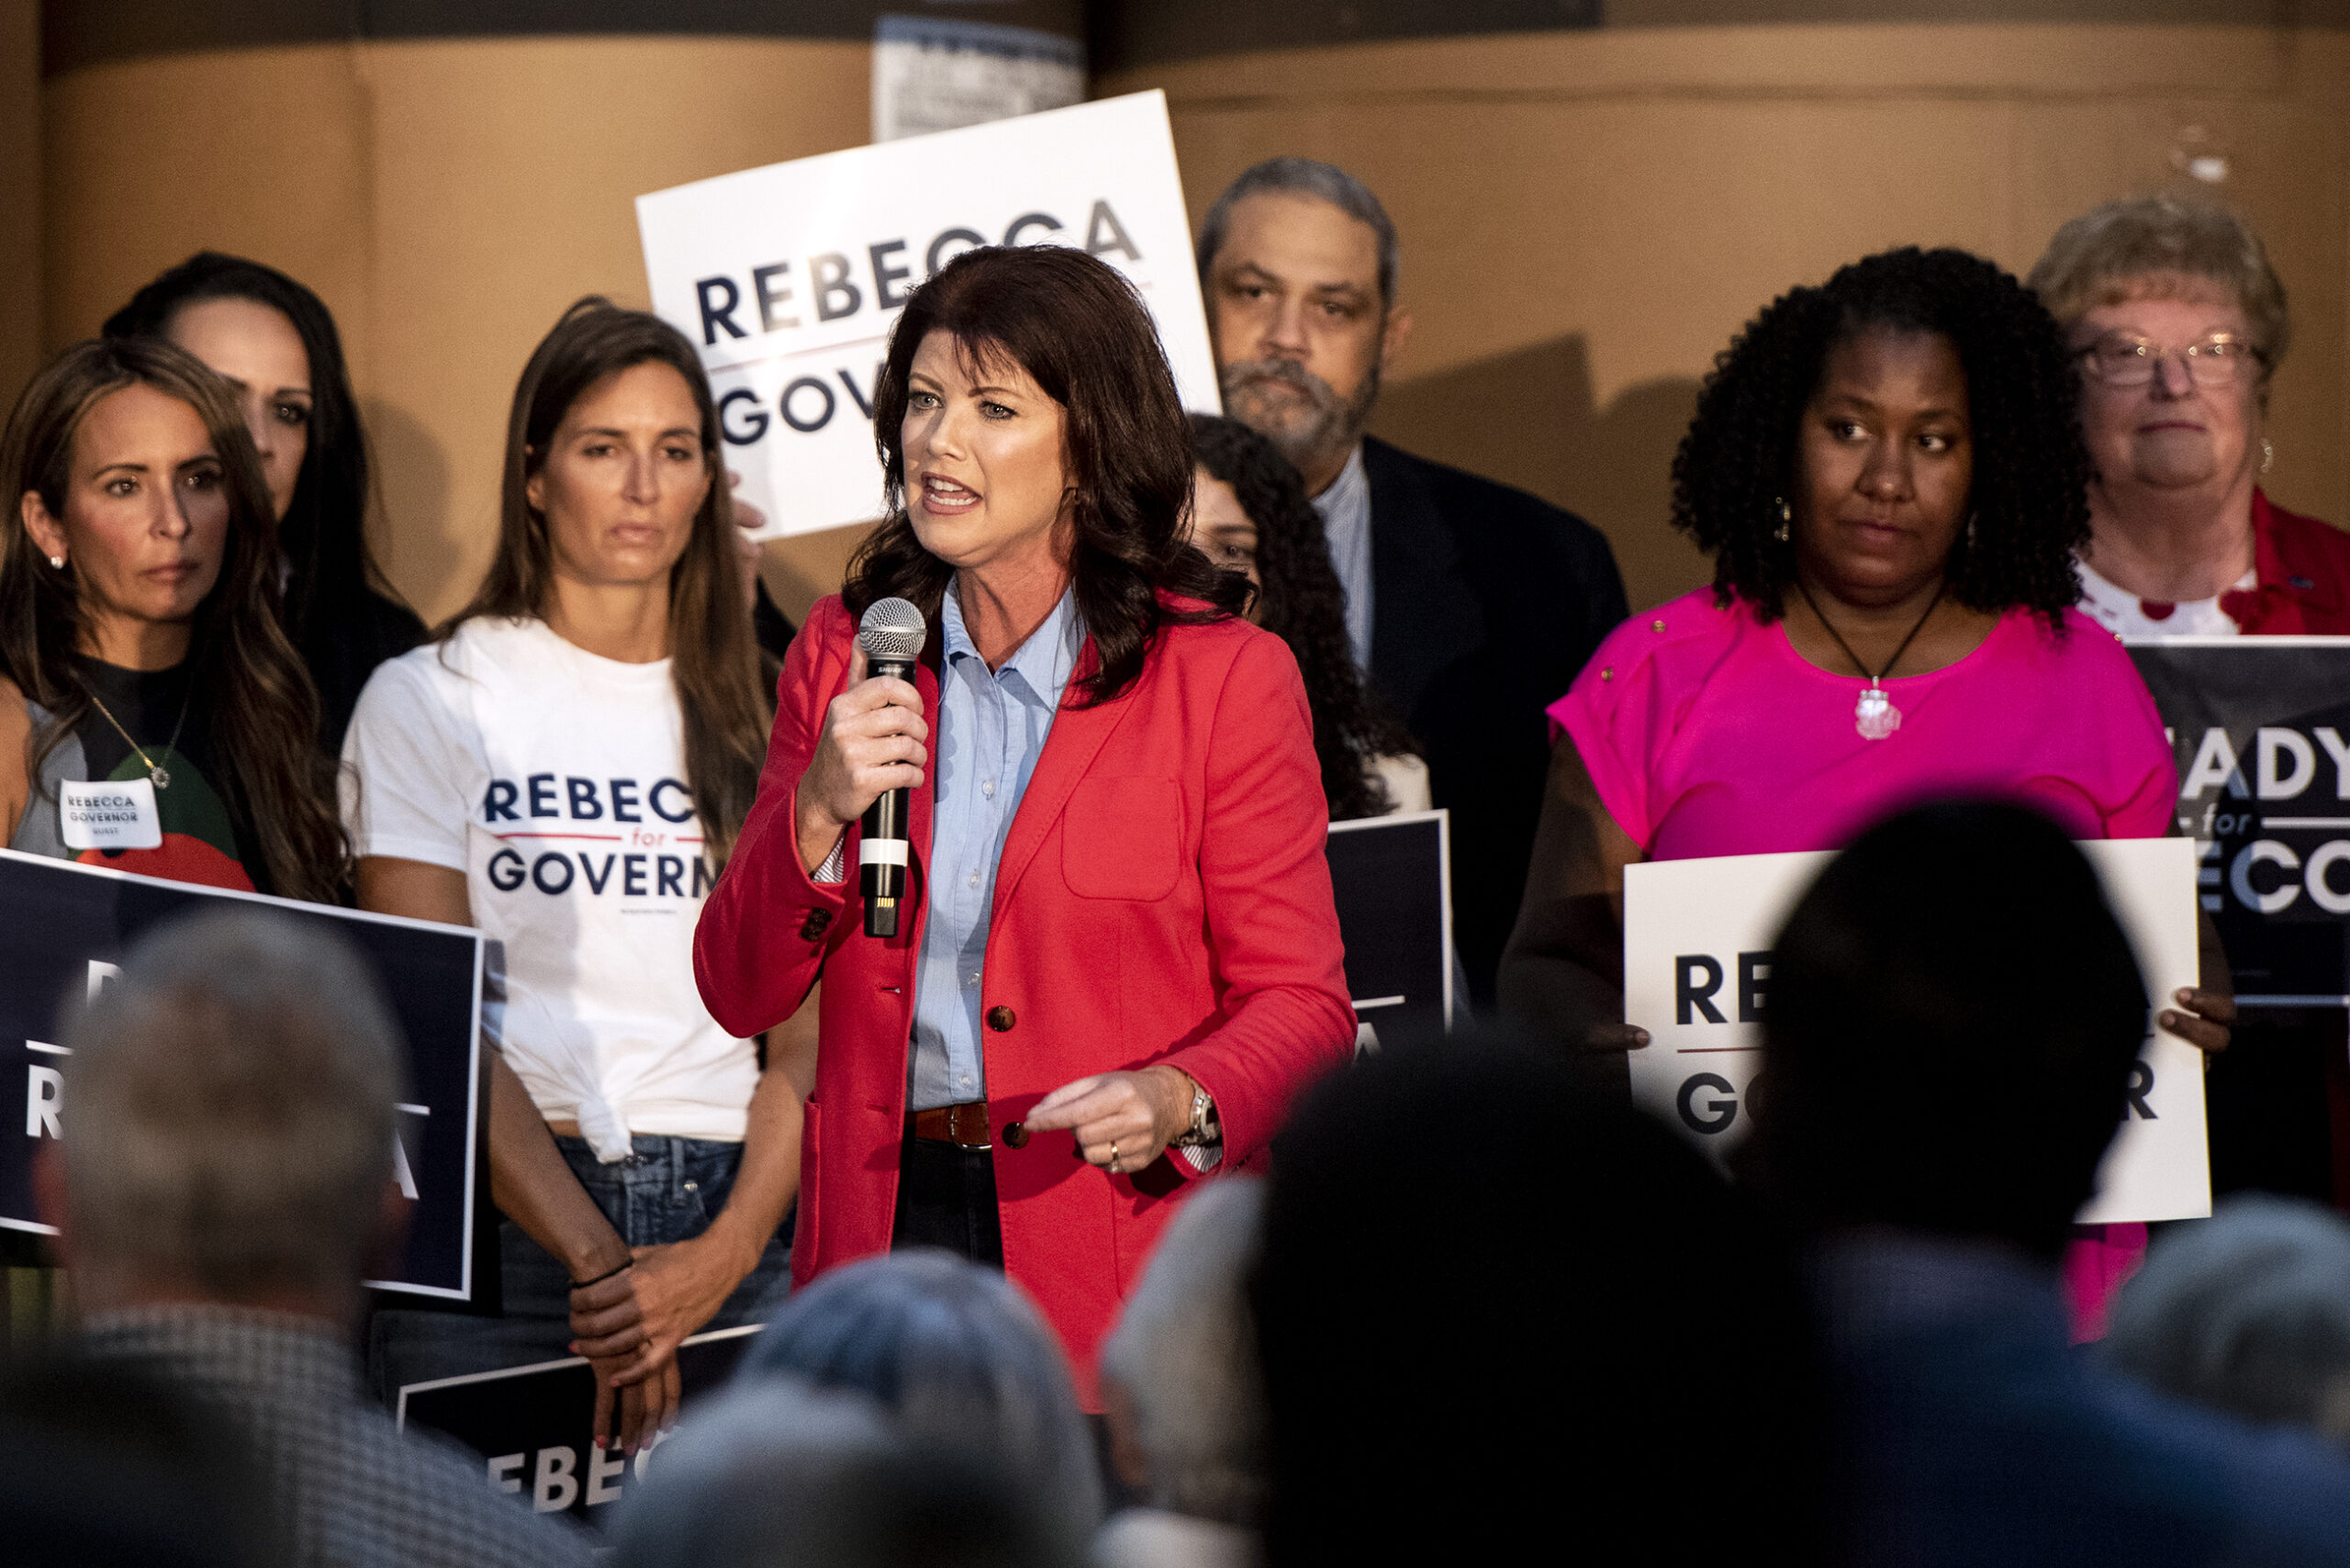 Rebecca Kleefisch speaks into a microphone while on stage with supporters holding campaign signs.